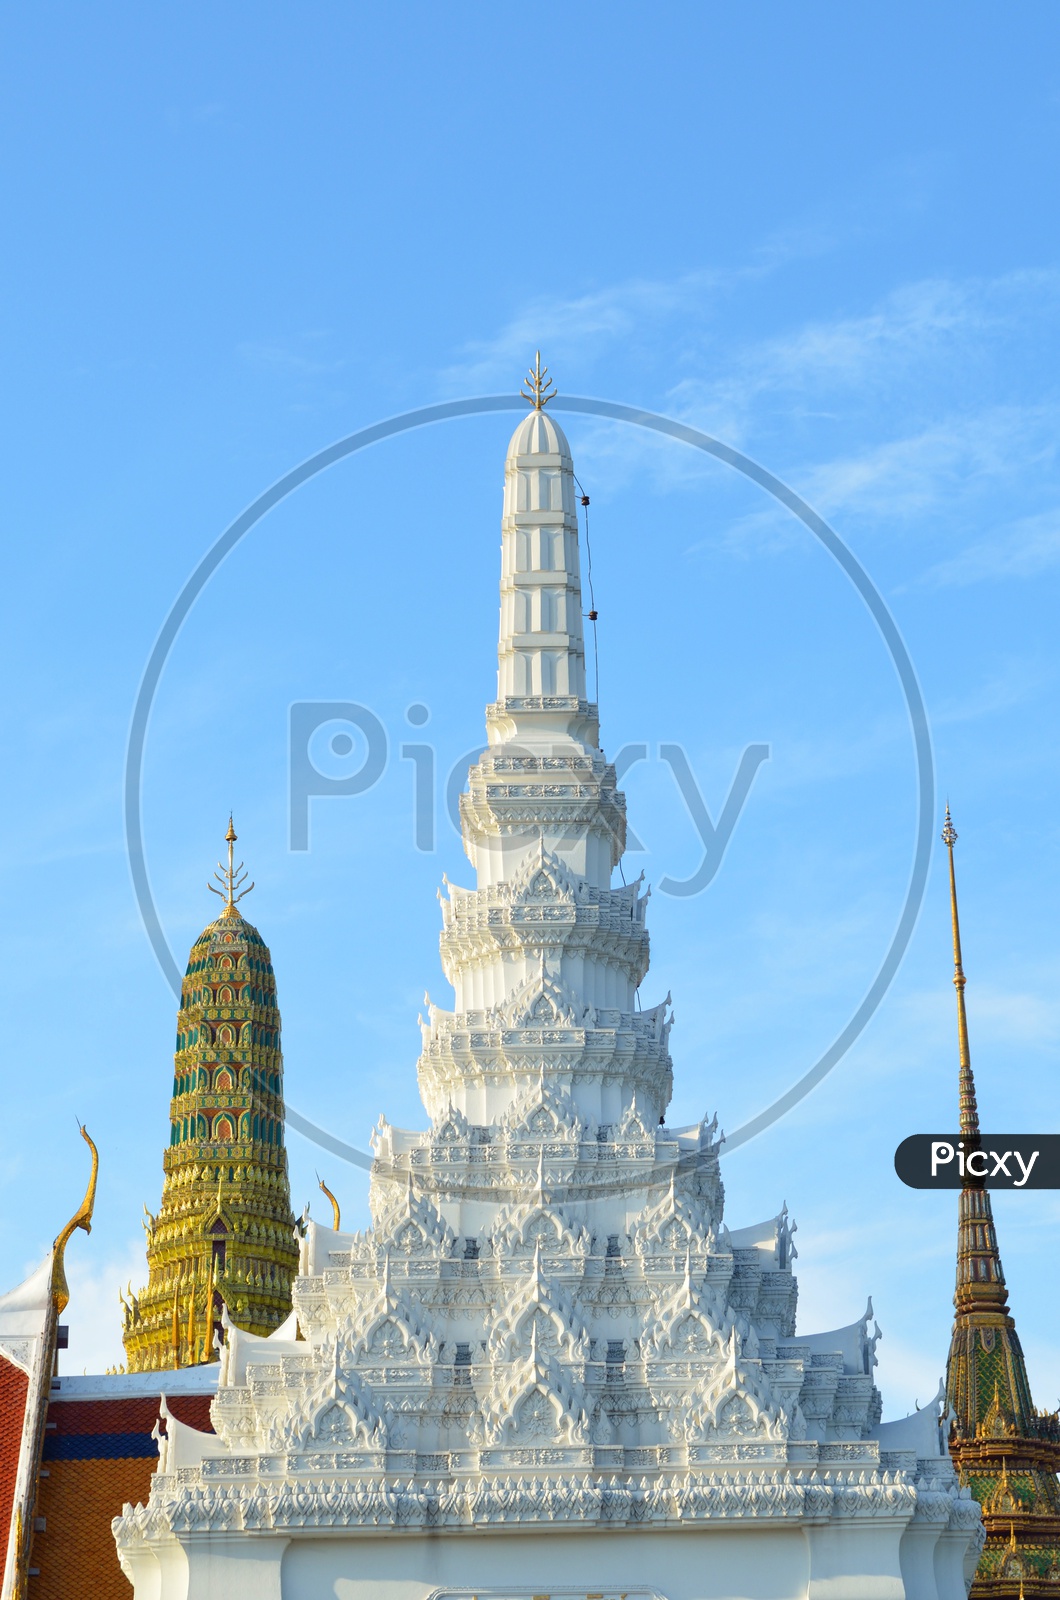 Temple Shrine Of  Buddha Temple or Gold Palace  of  Wat Phra Kaew at bangkok in  thailand